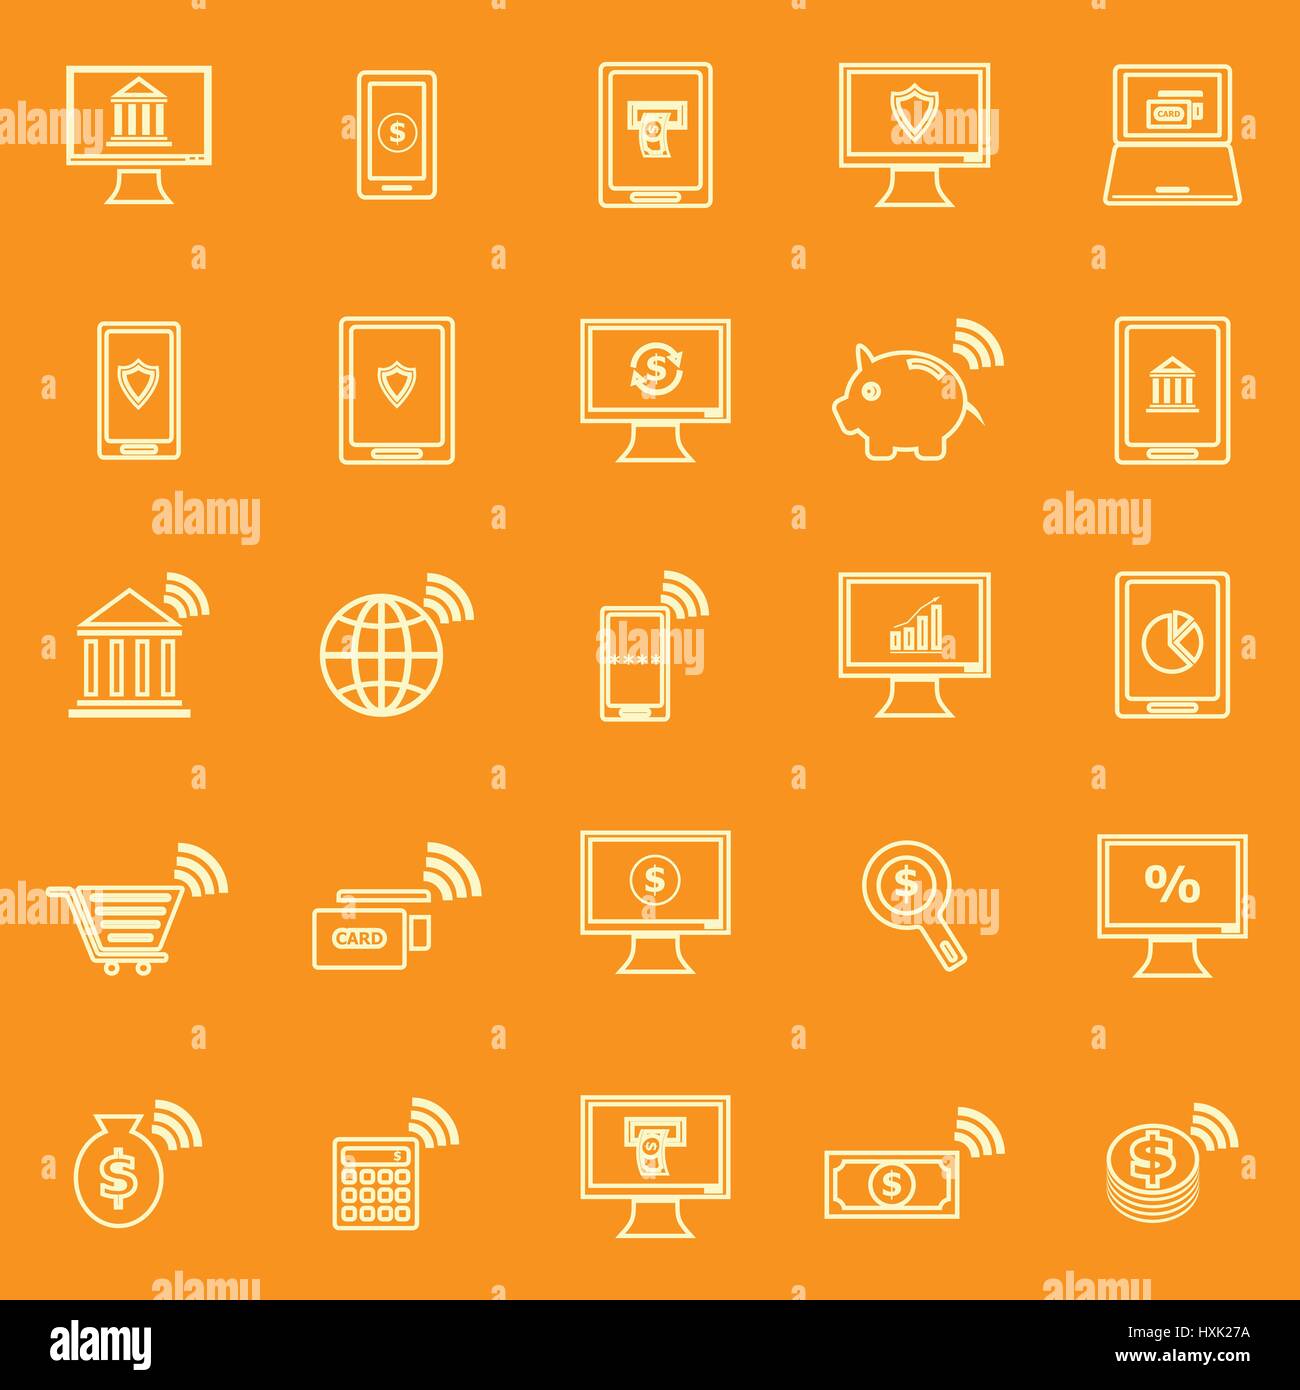 Online banking line color icons on orange background, stock vector Stock Vector